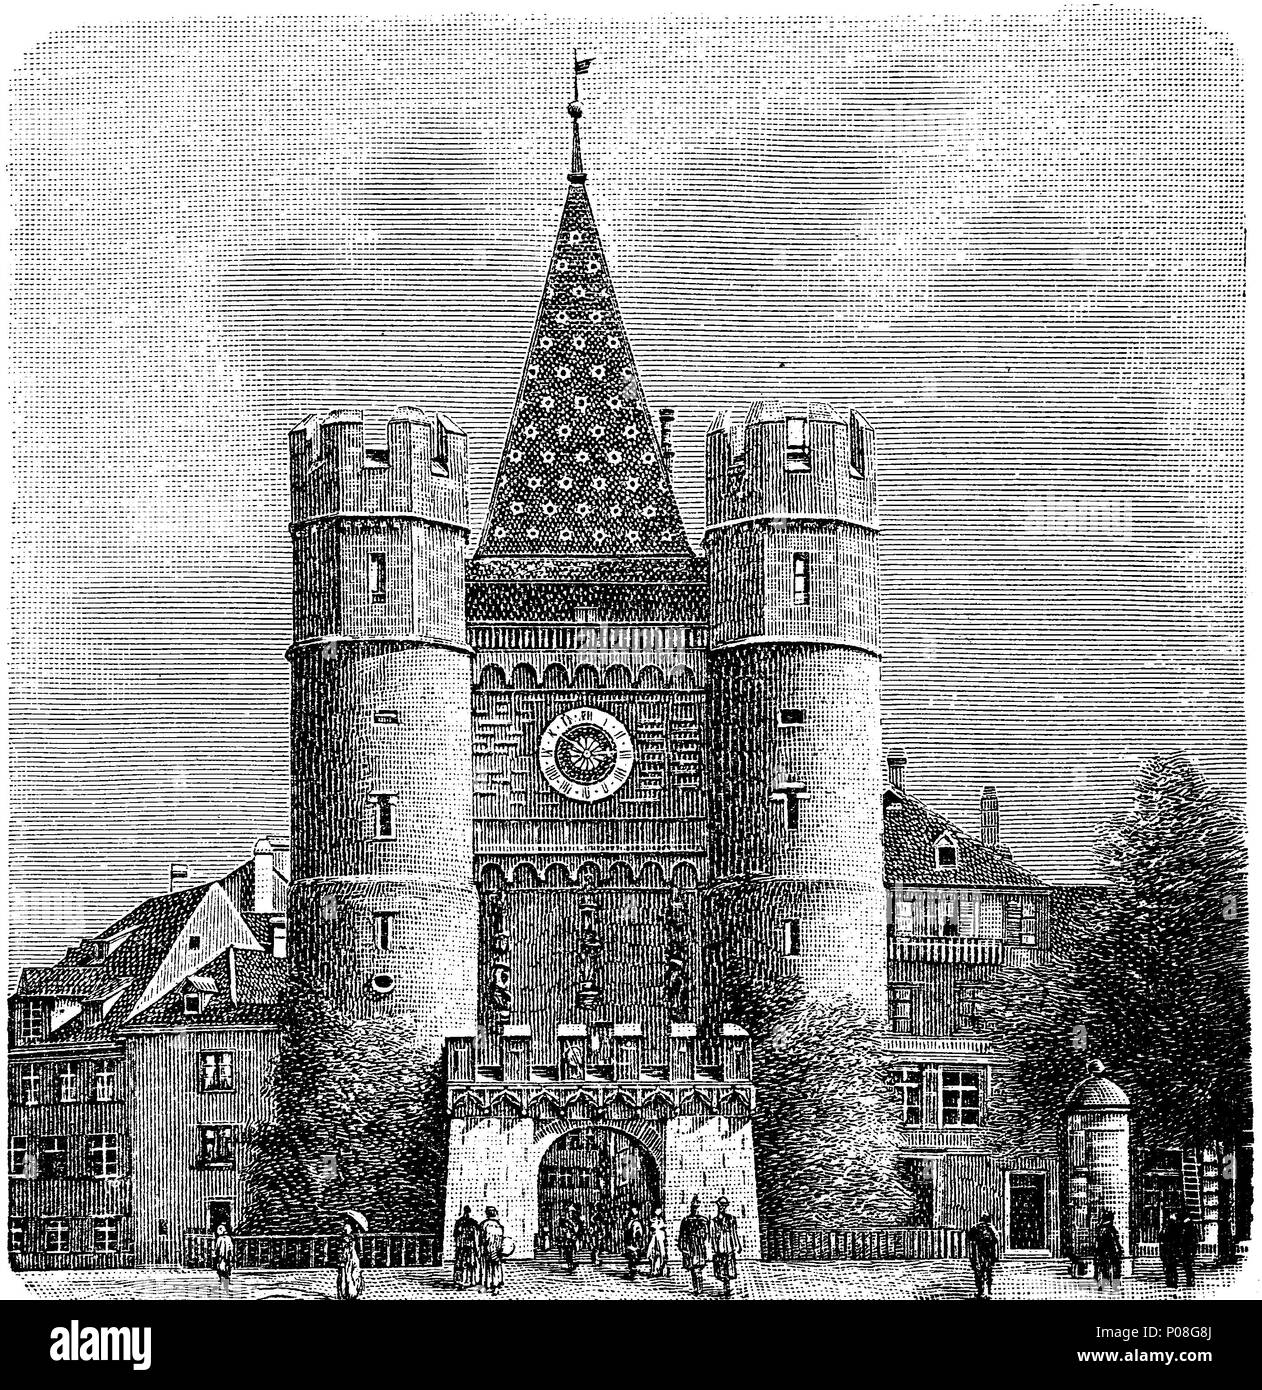 Spalentor zu Basel, Schweiz. The Gate of Spalen is a former city gate in the ancient city walls of Basel, Switzerland, digital improved reproduction of an original print from the year 1881 Stock Photo